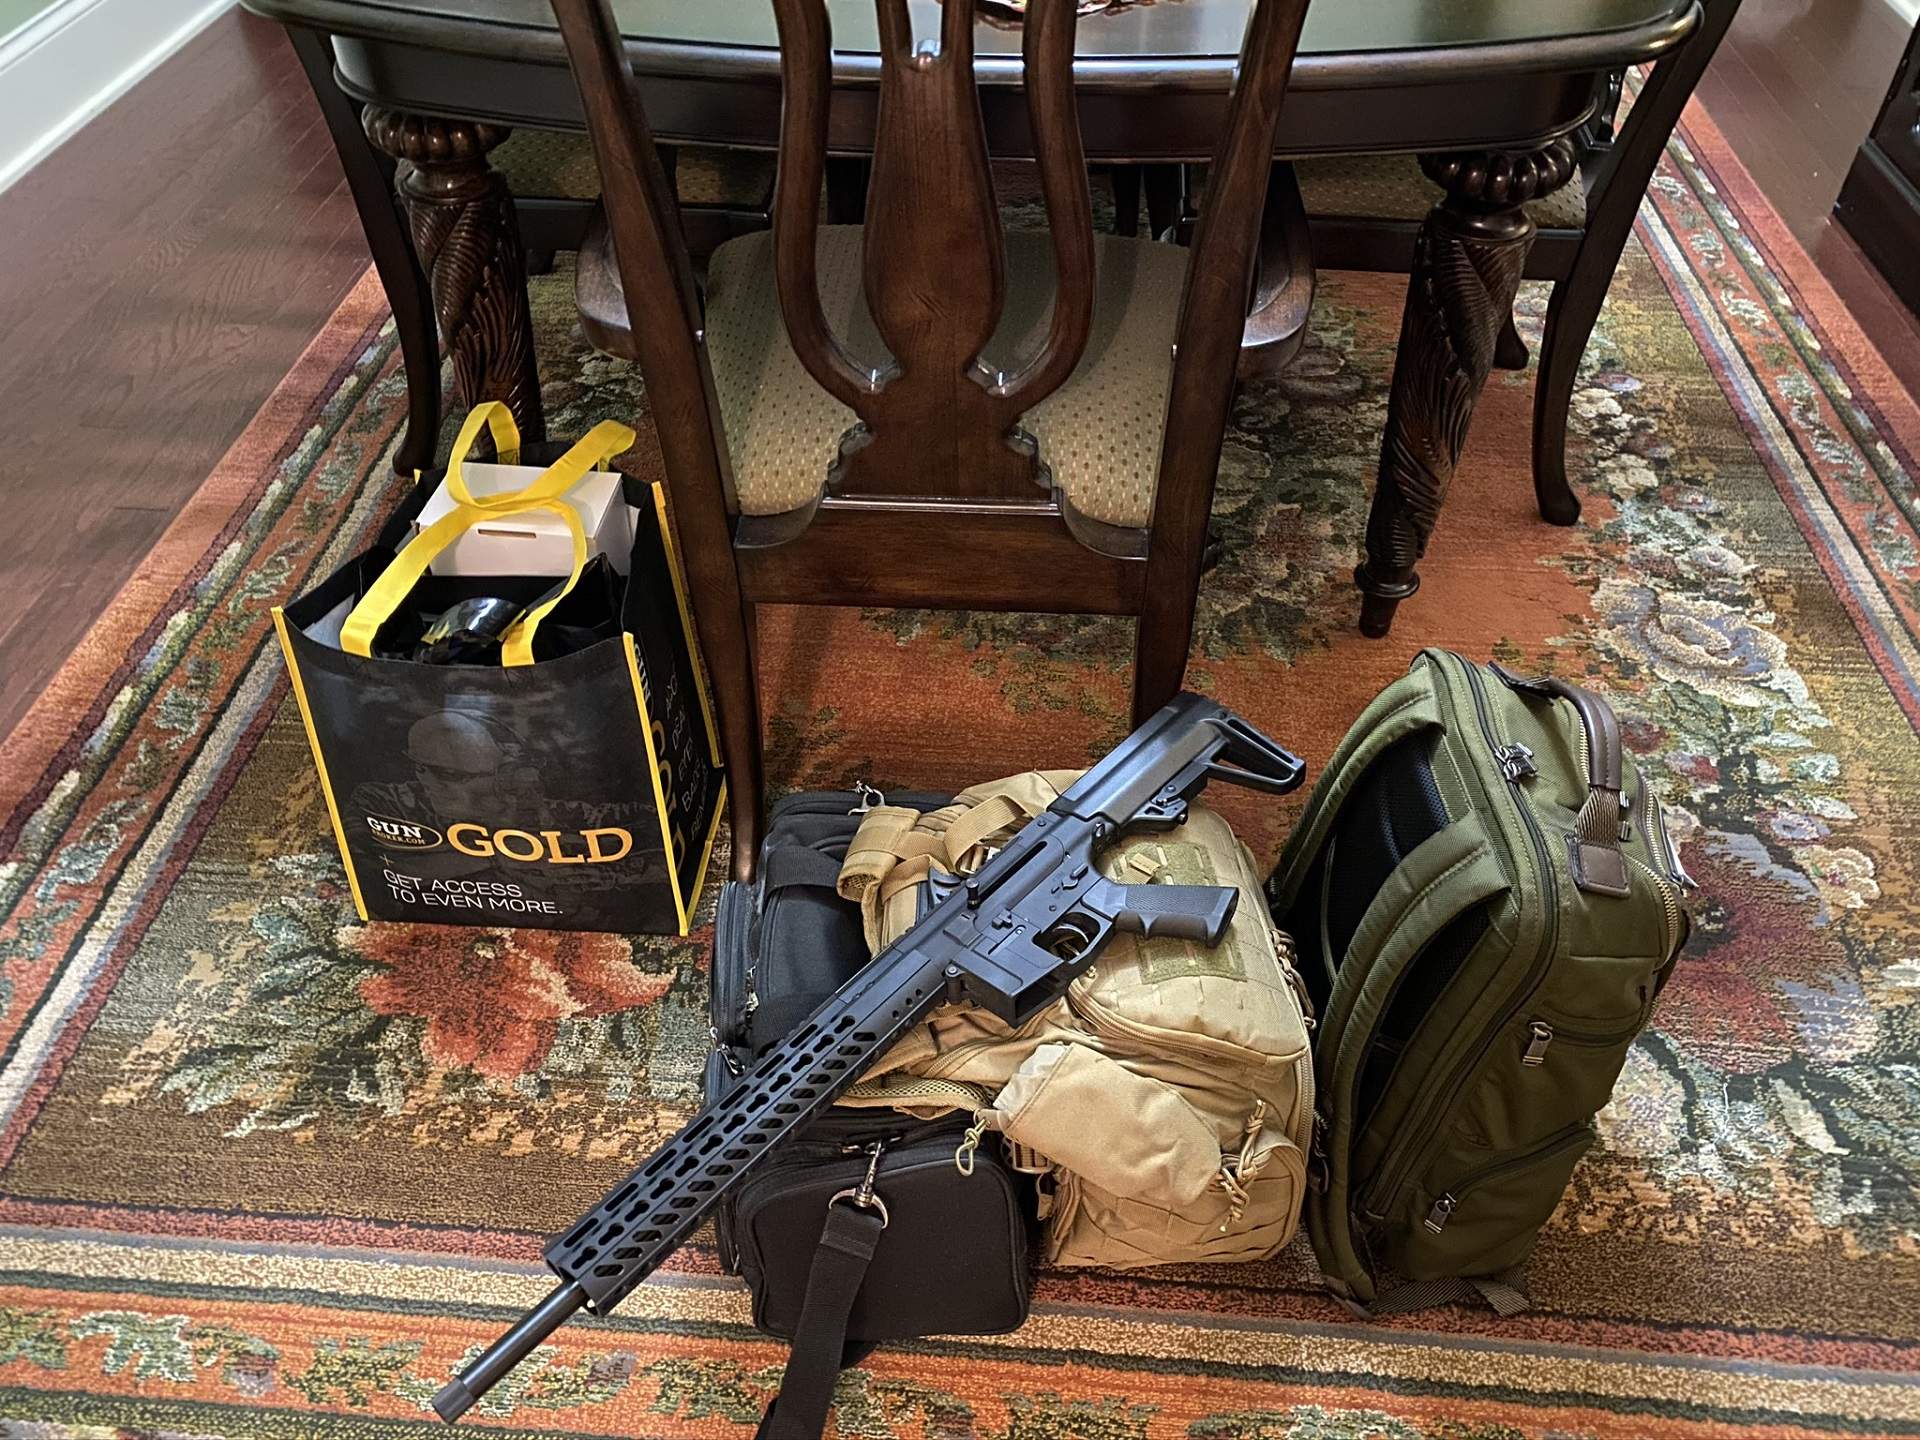 gear packed for trip to the indoor gun range